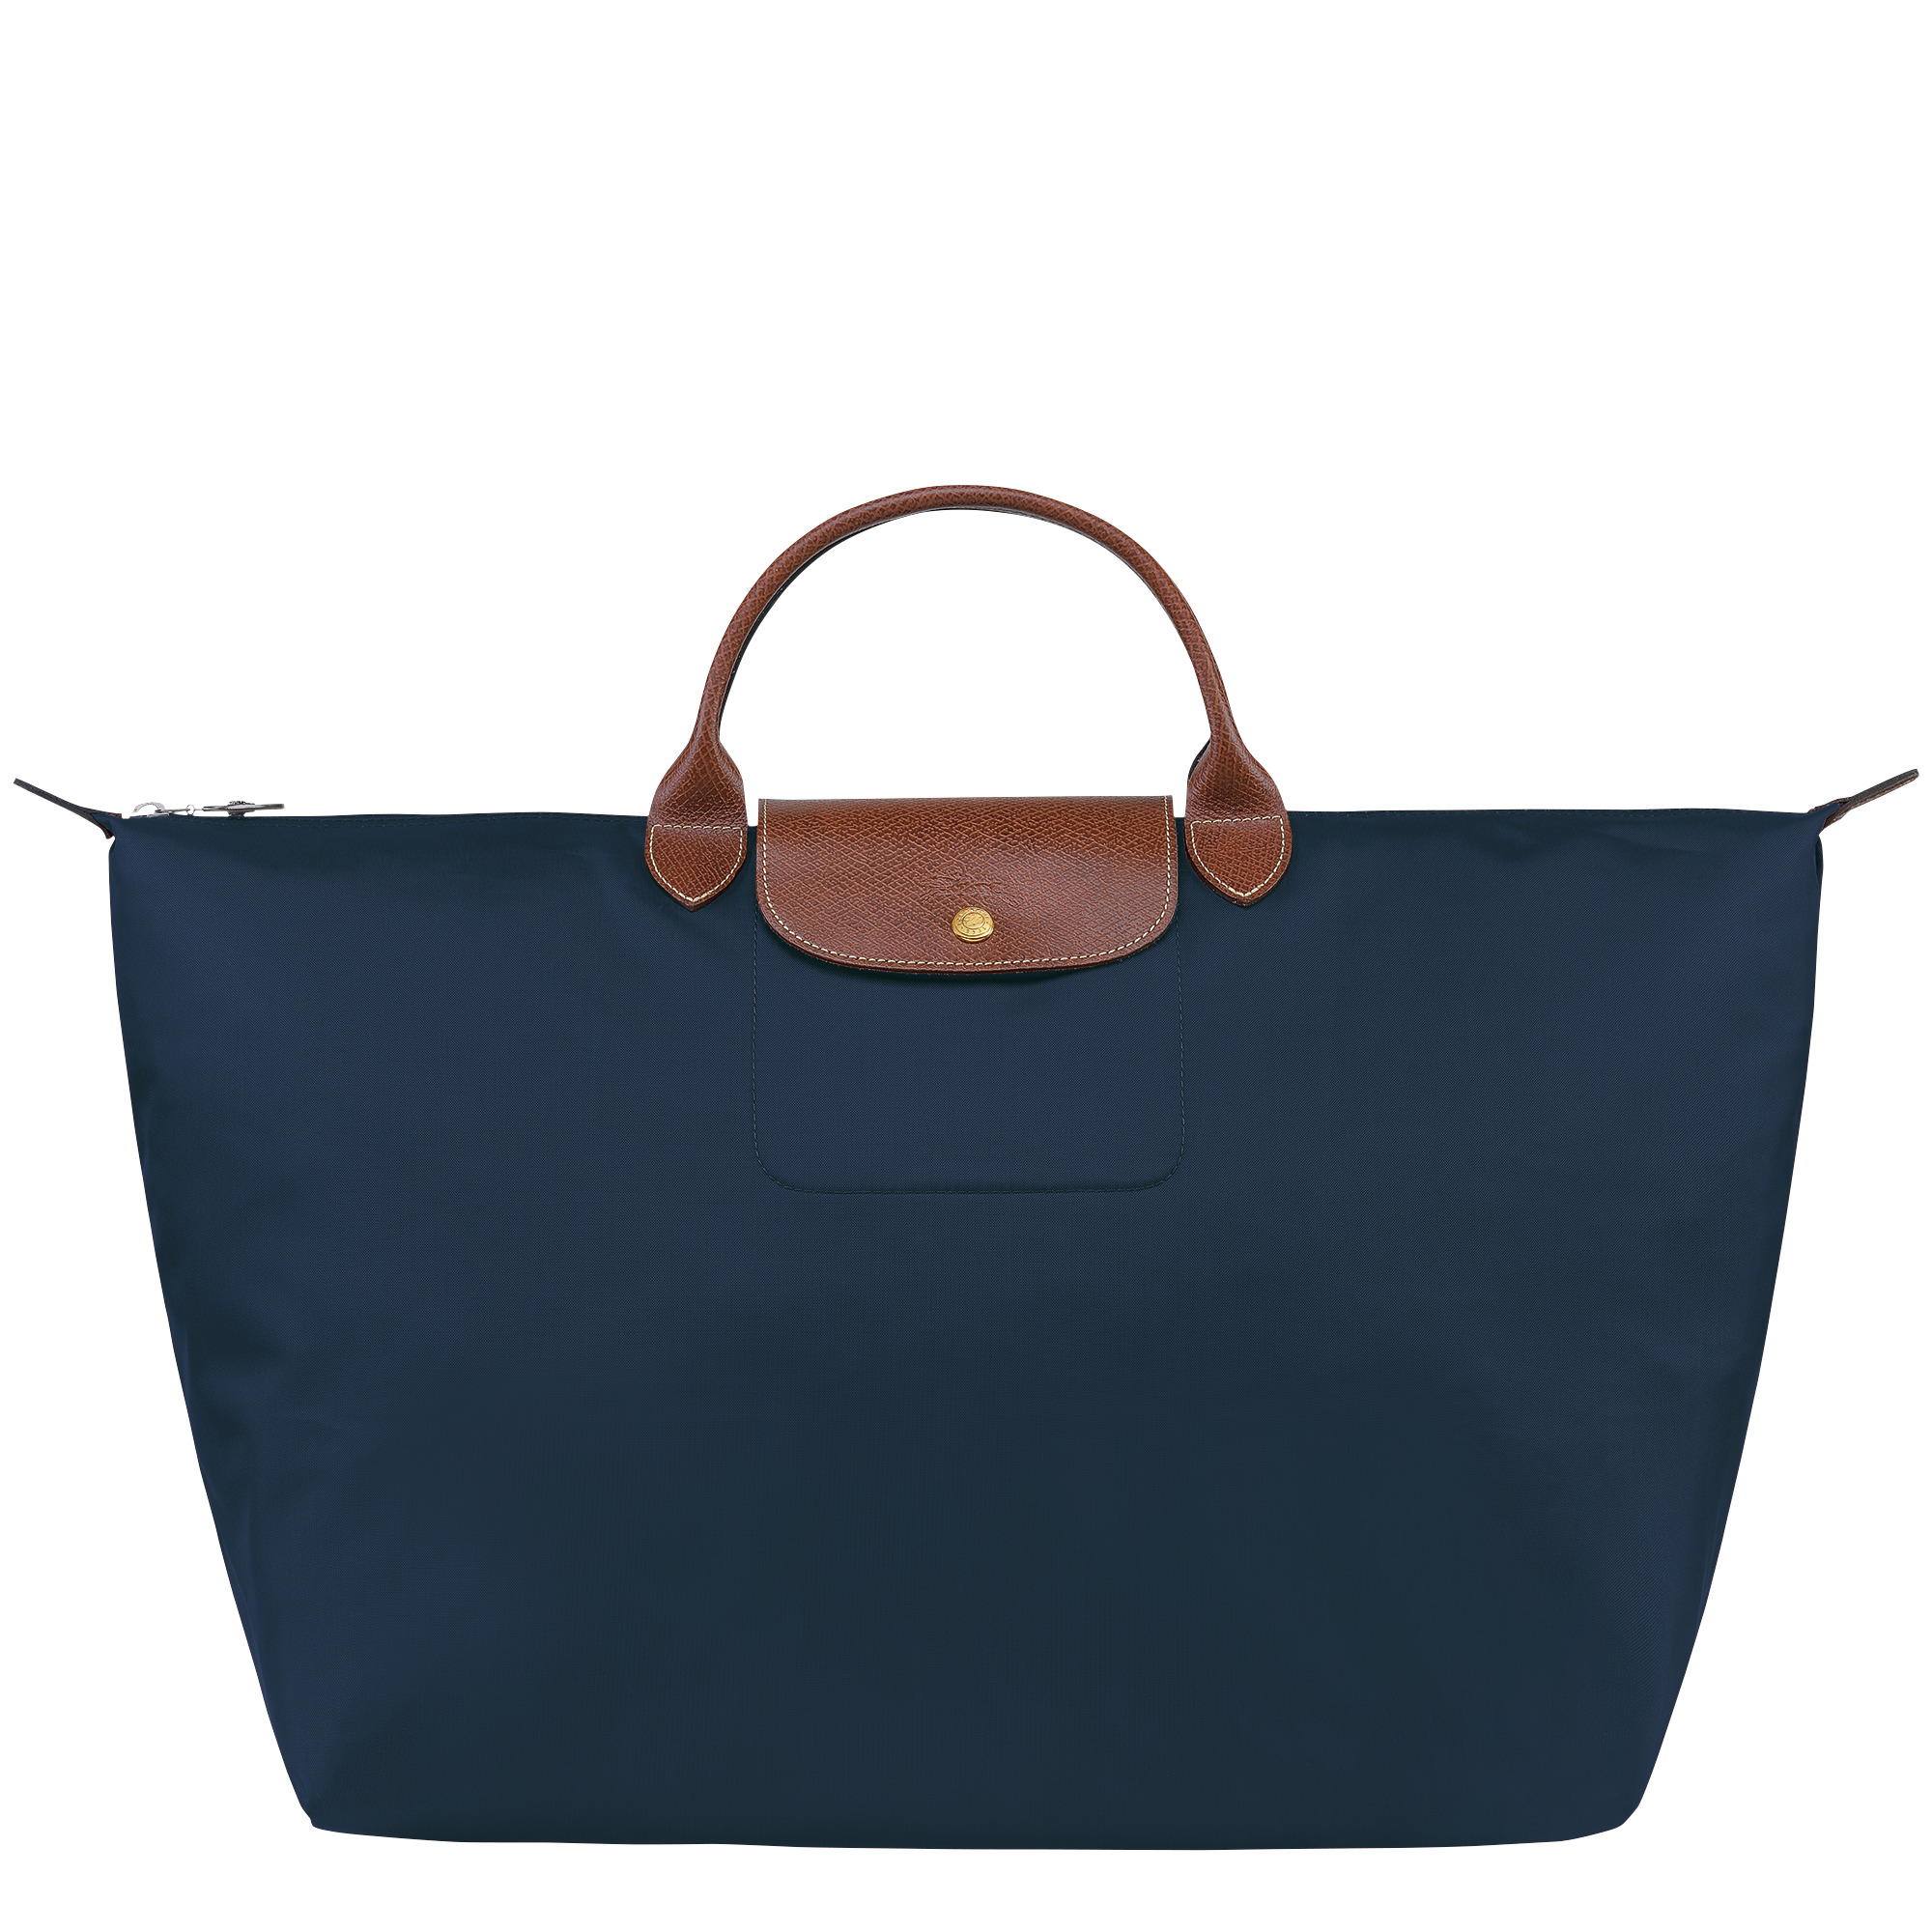 Le Pliage Original S Travel bag Navy - Recycled canvas - 1